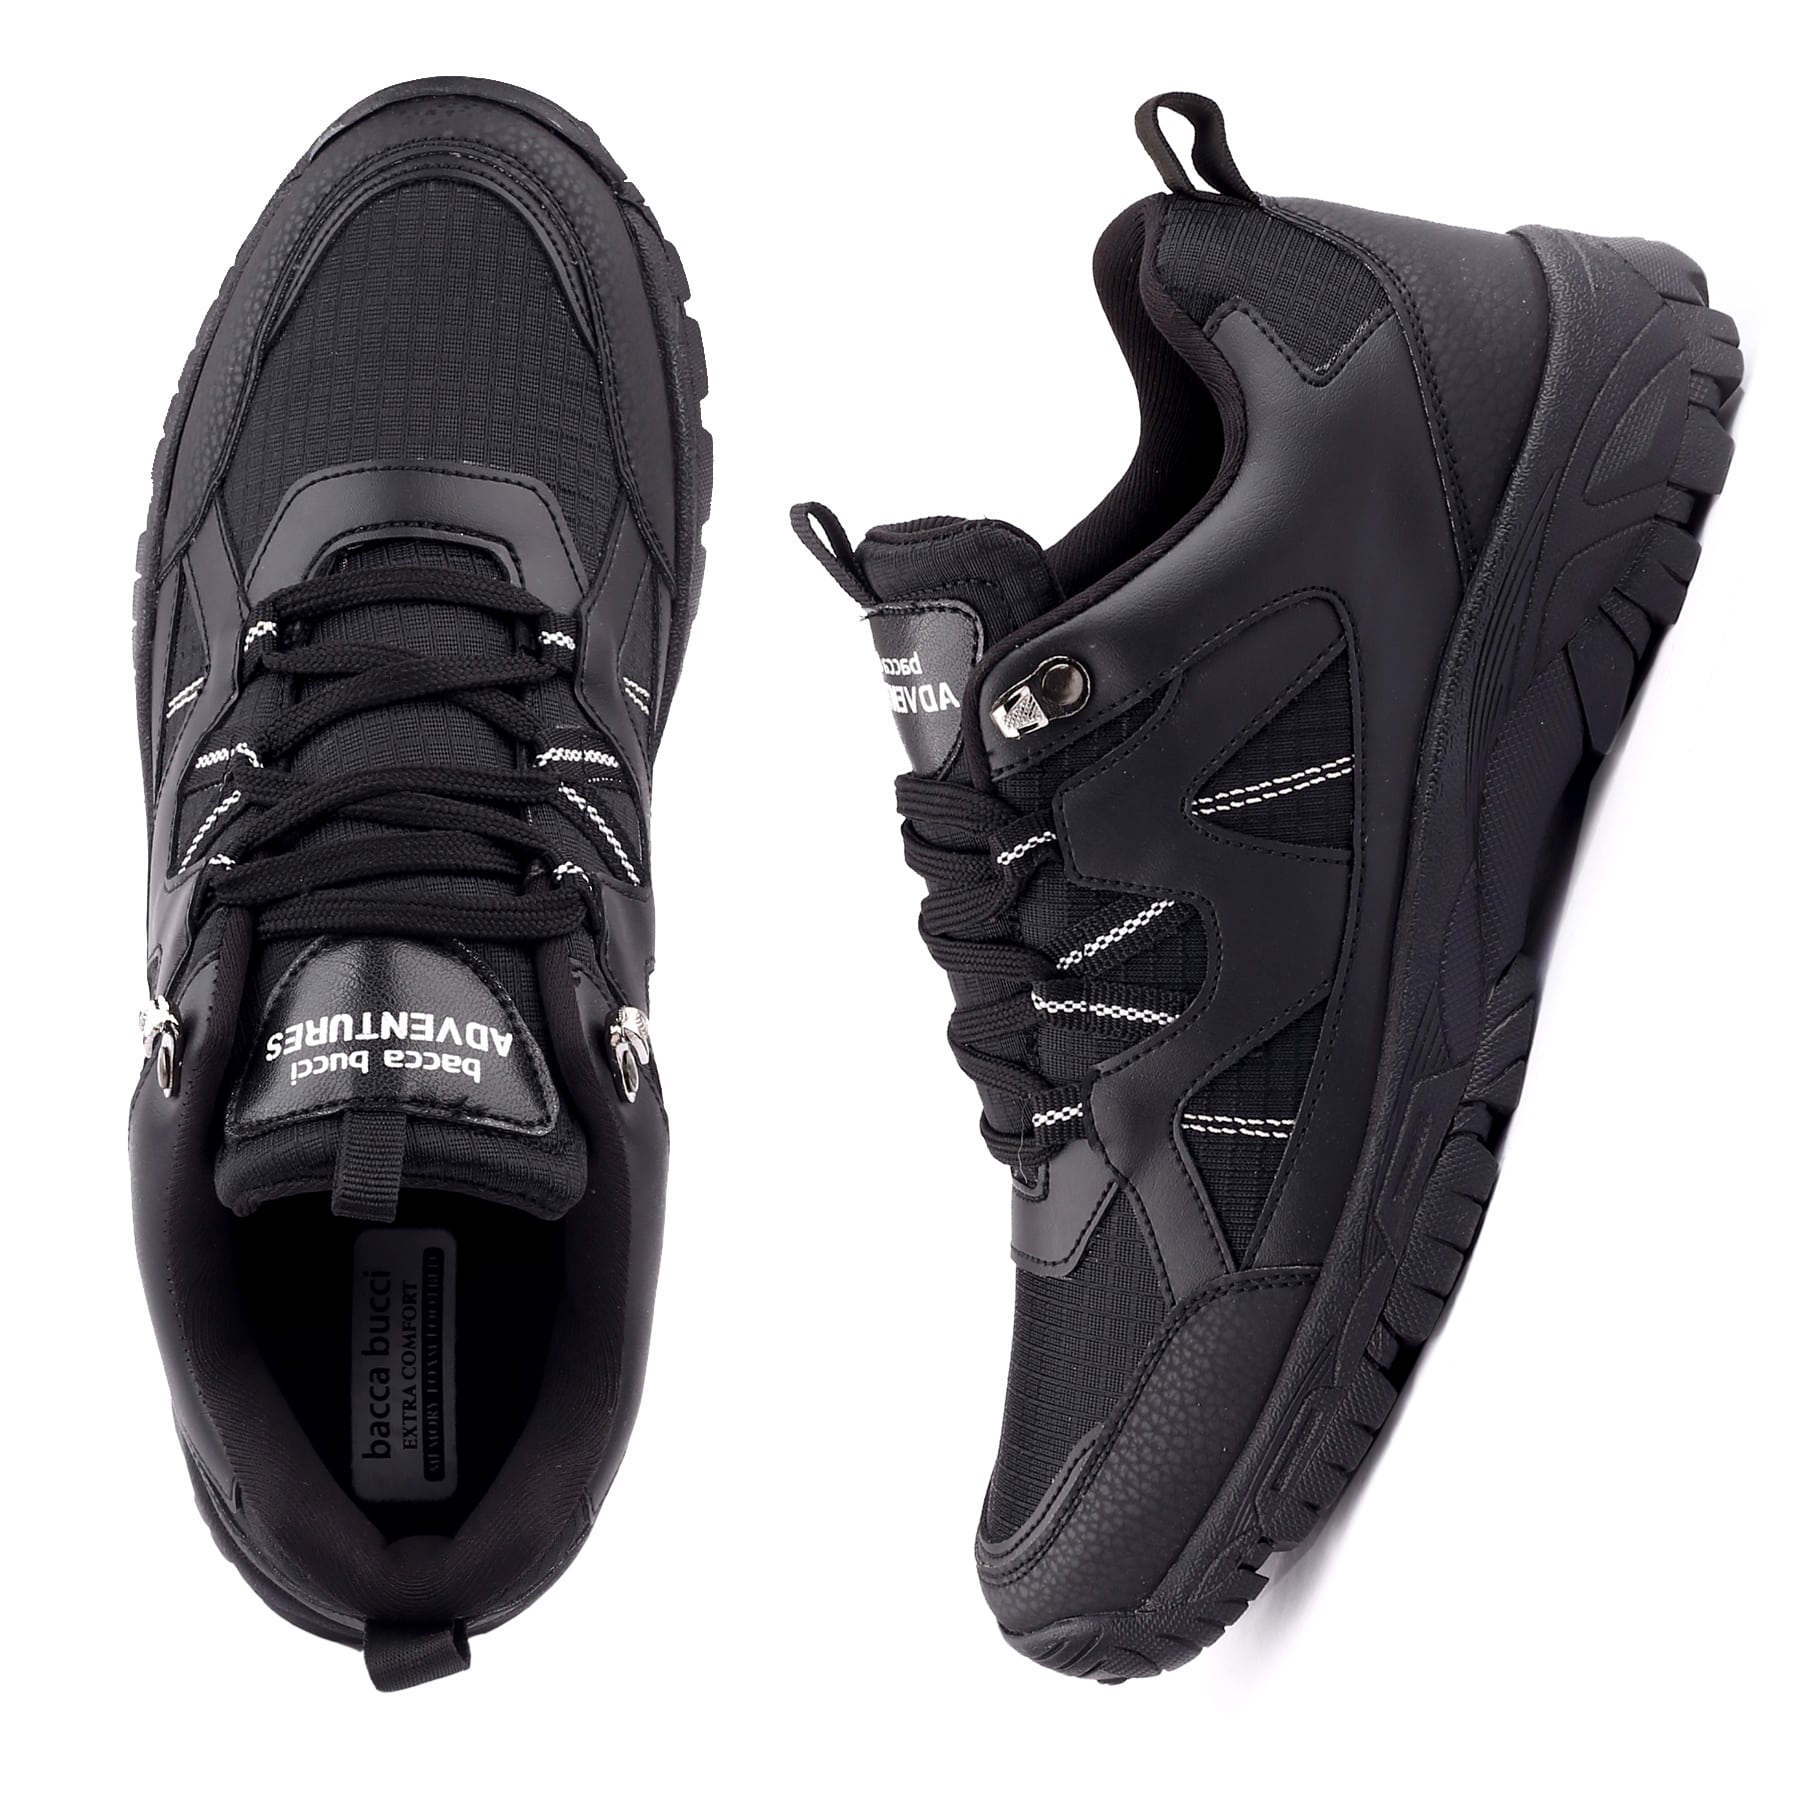 Bacca Bucci ATLAS: Waterproof Hiking Shoes for Trekking, Mountaineering, and Trails.